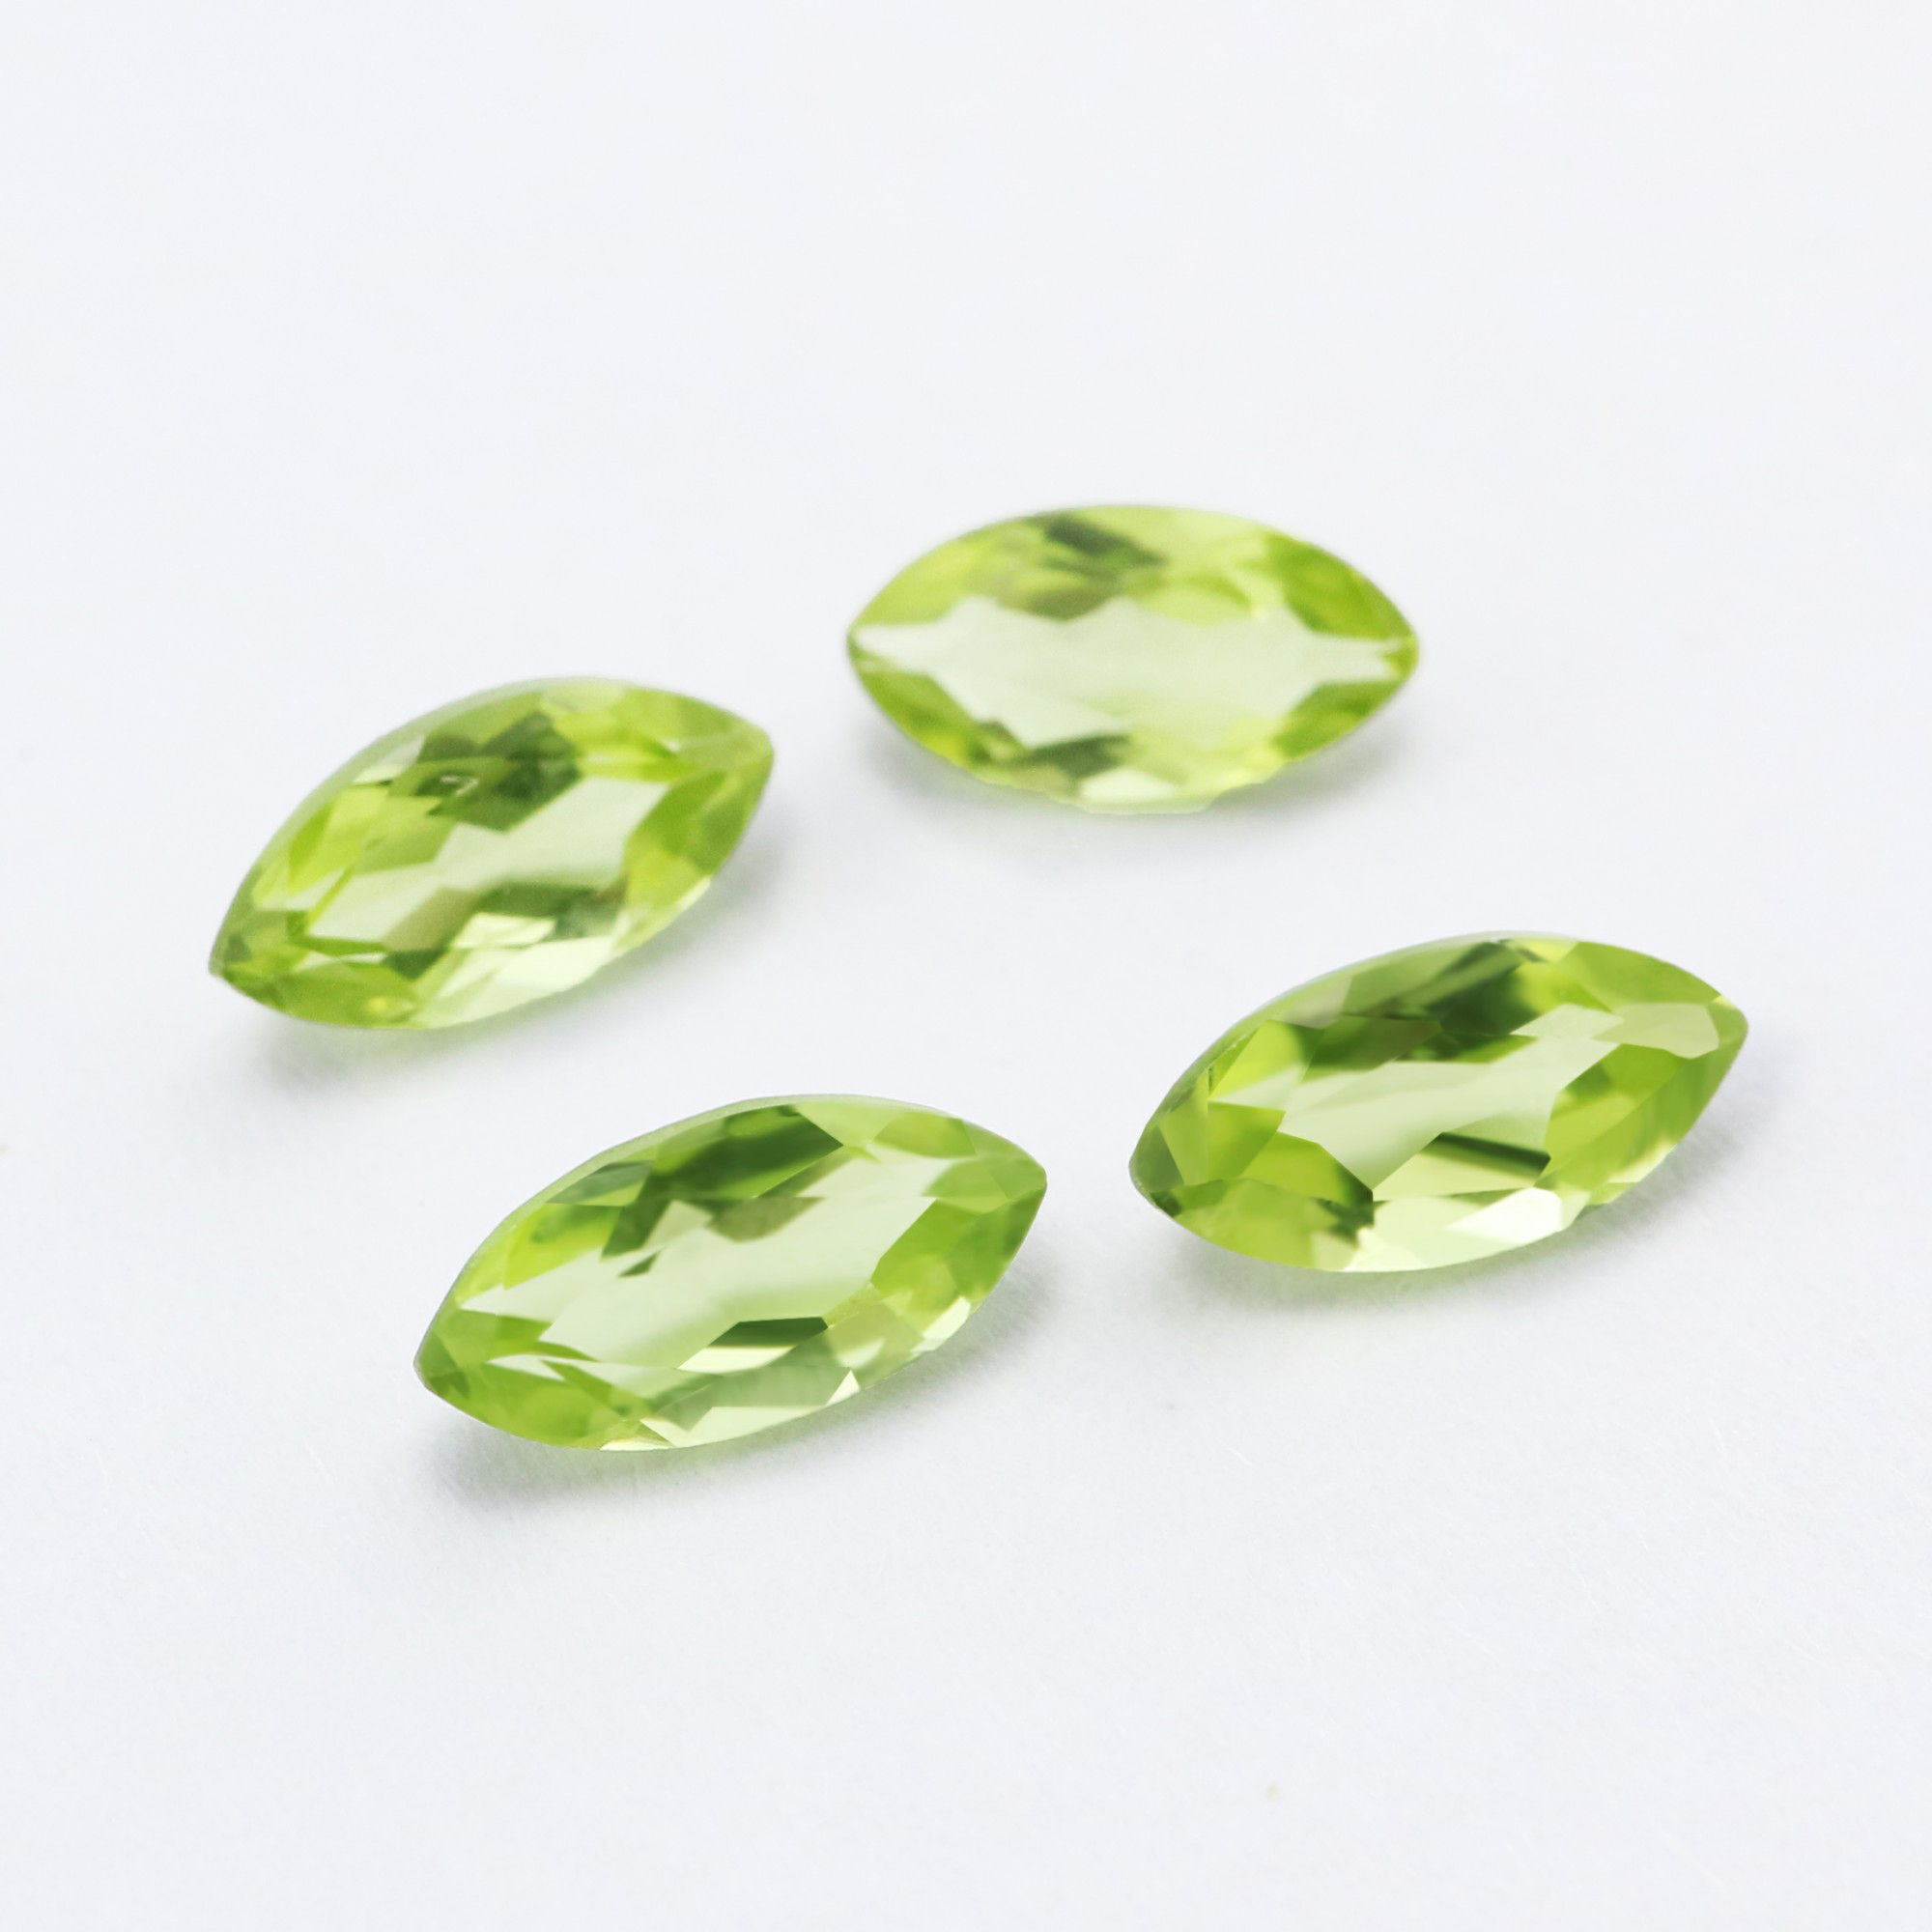 1Pcs Marquise Green Peridot August Birthstone Faceted Cut Loose Gemstone Natural Semi Precious Stone DIY Jewelry Supplies 4120130 - Click Image to Close